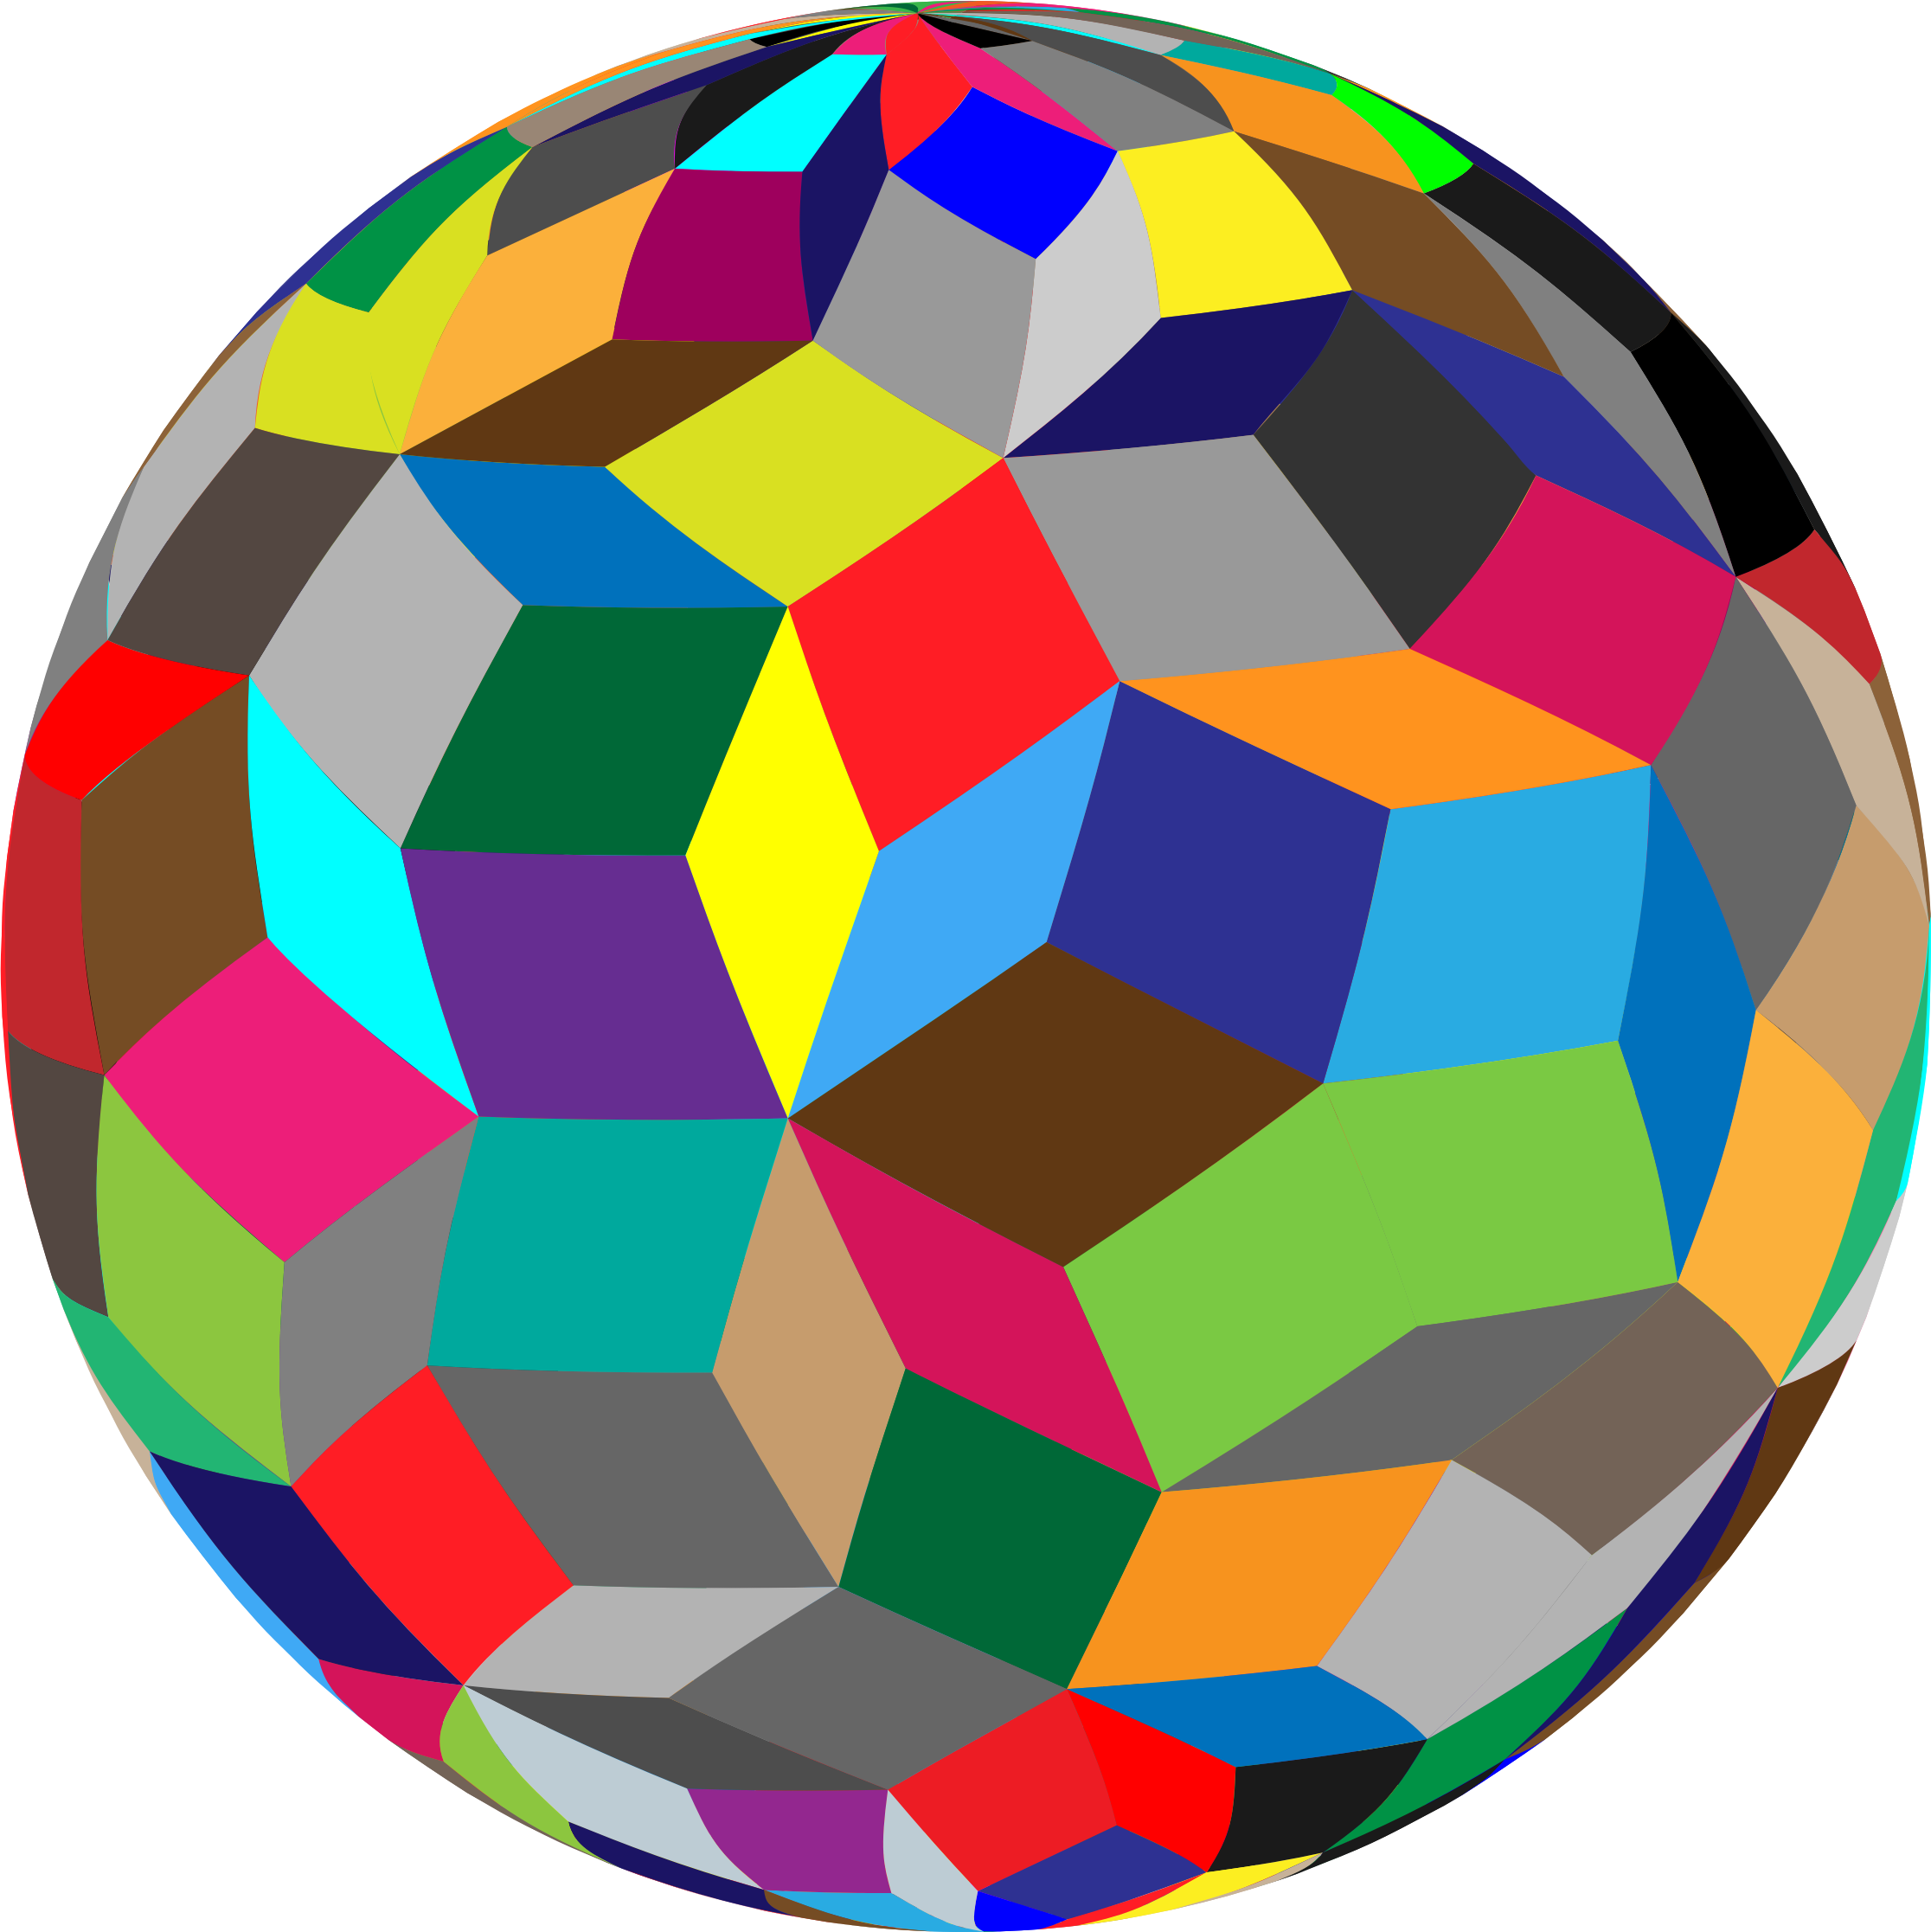 This Free Icons Png Design Of Colorful Geometric Sphere - Sphere Geometric (2232x2233)